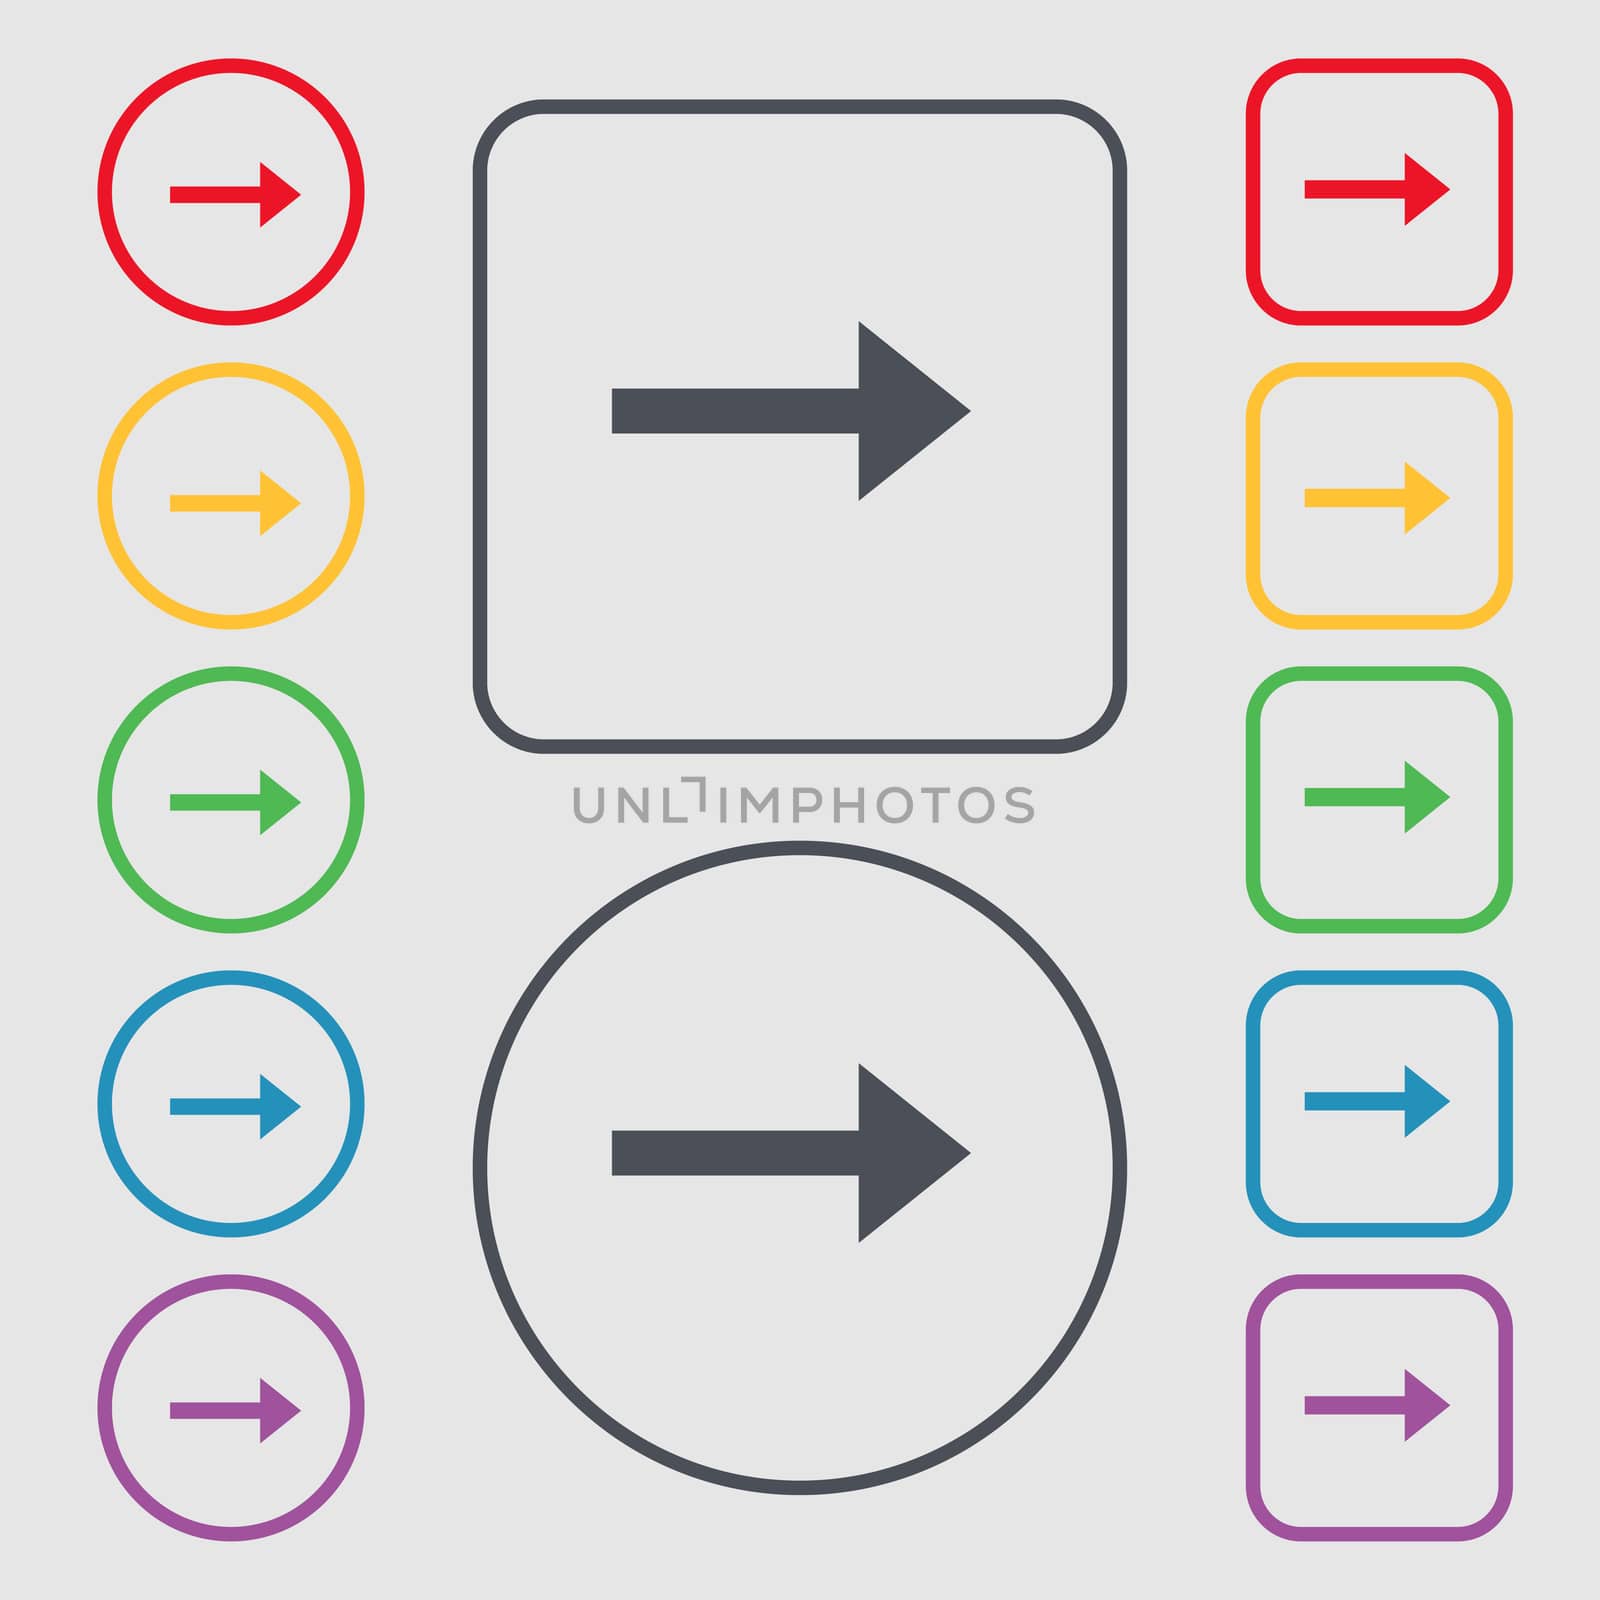 Arrow right, Next icon sign. symbol on the Round and square buttons with frame. illustration